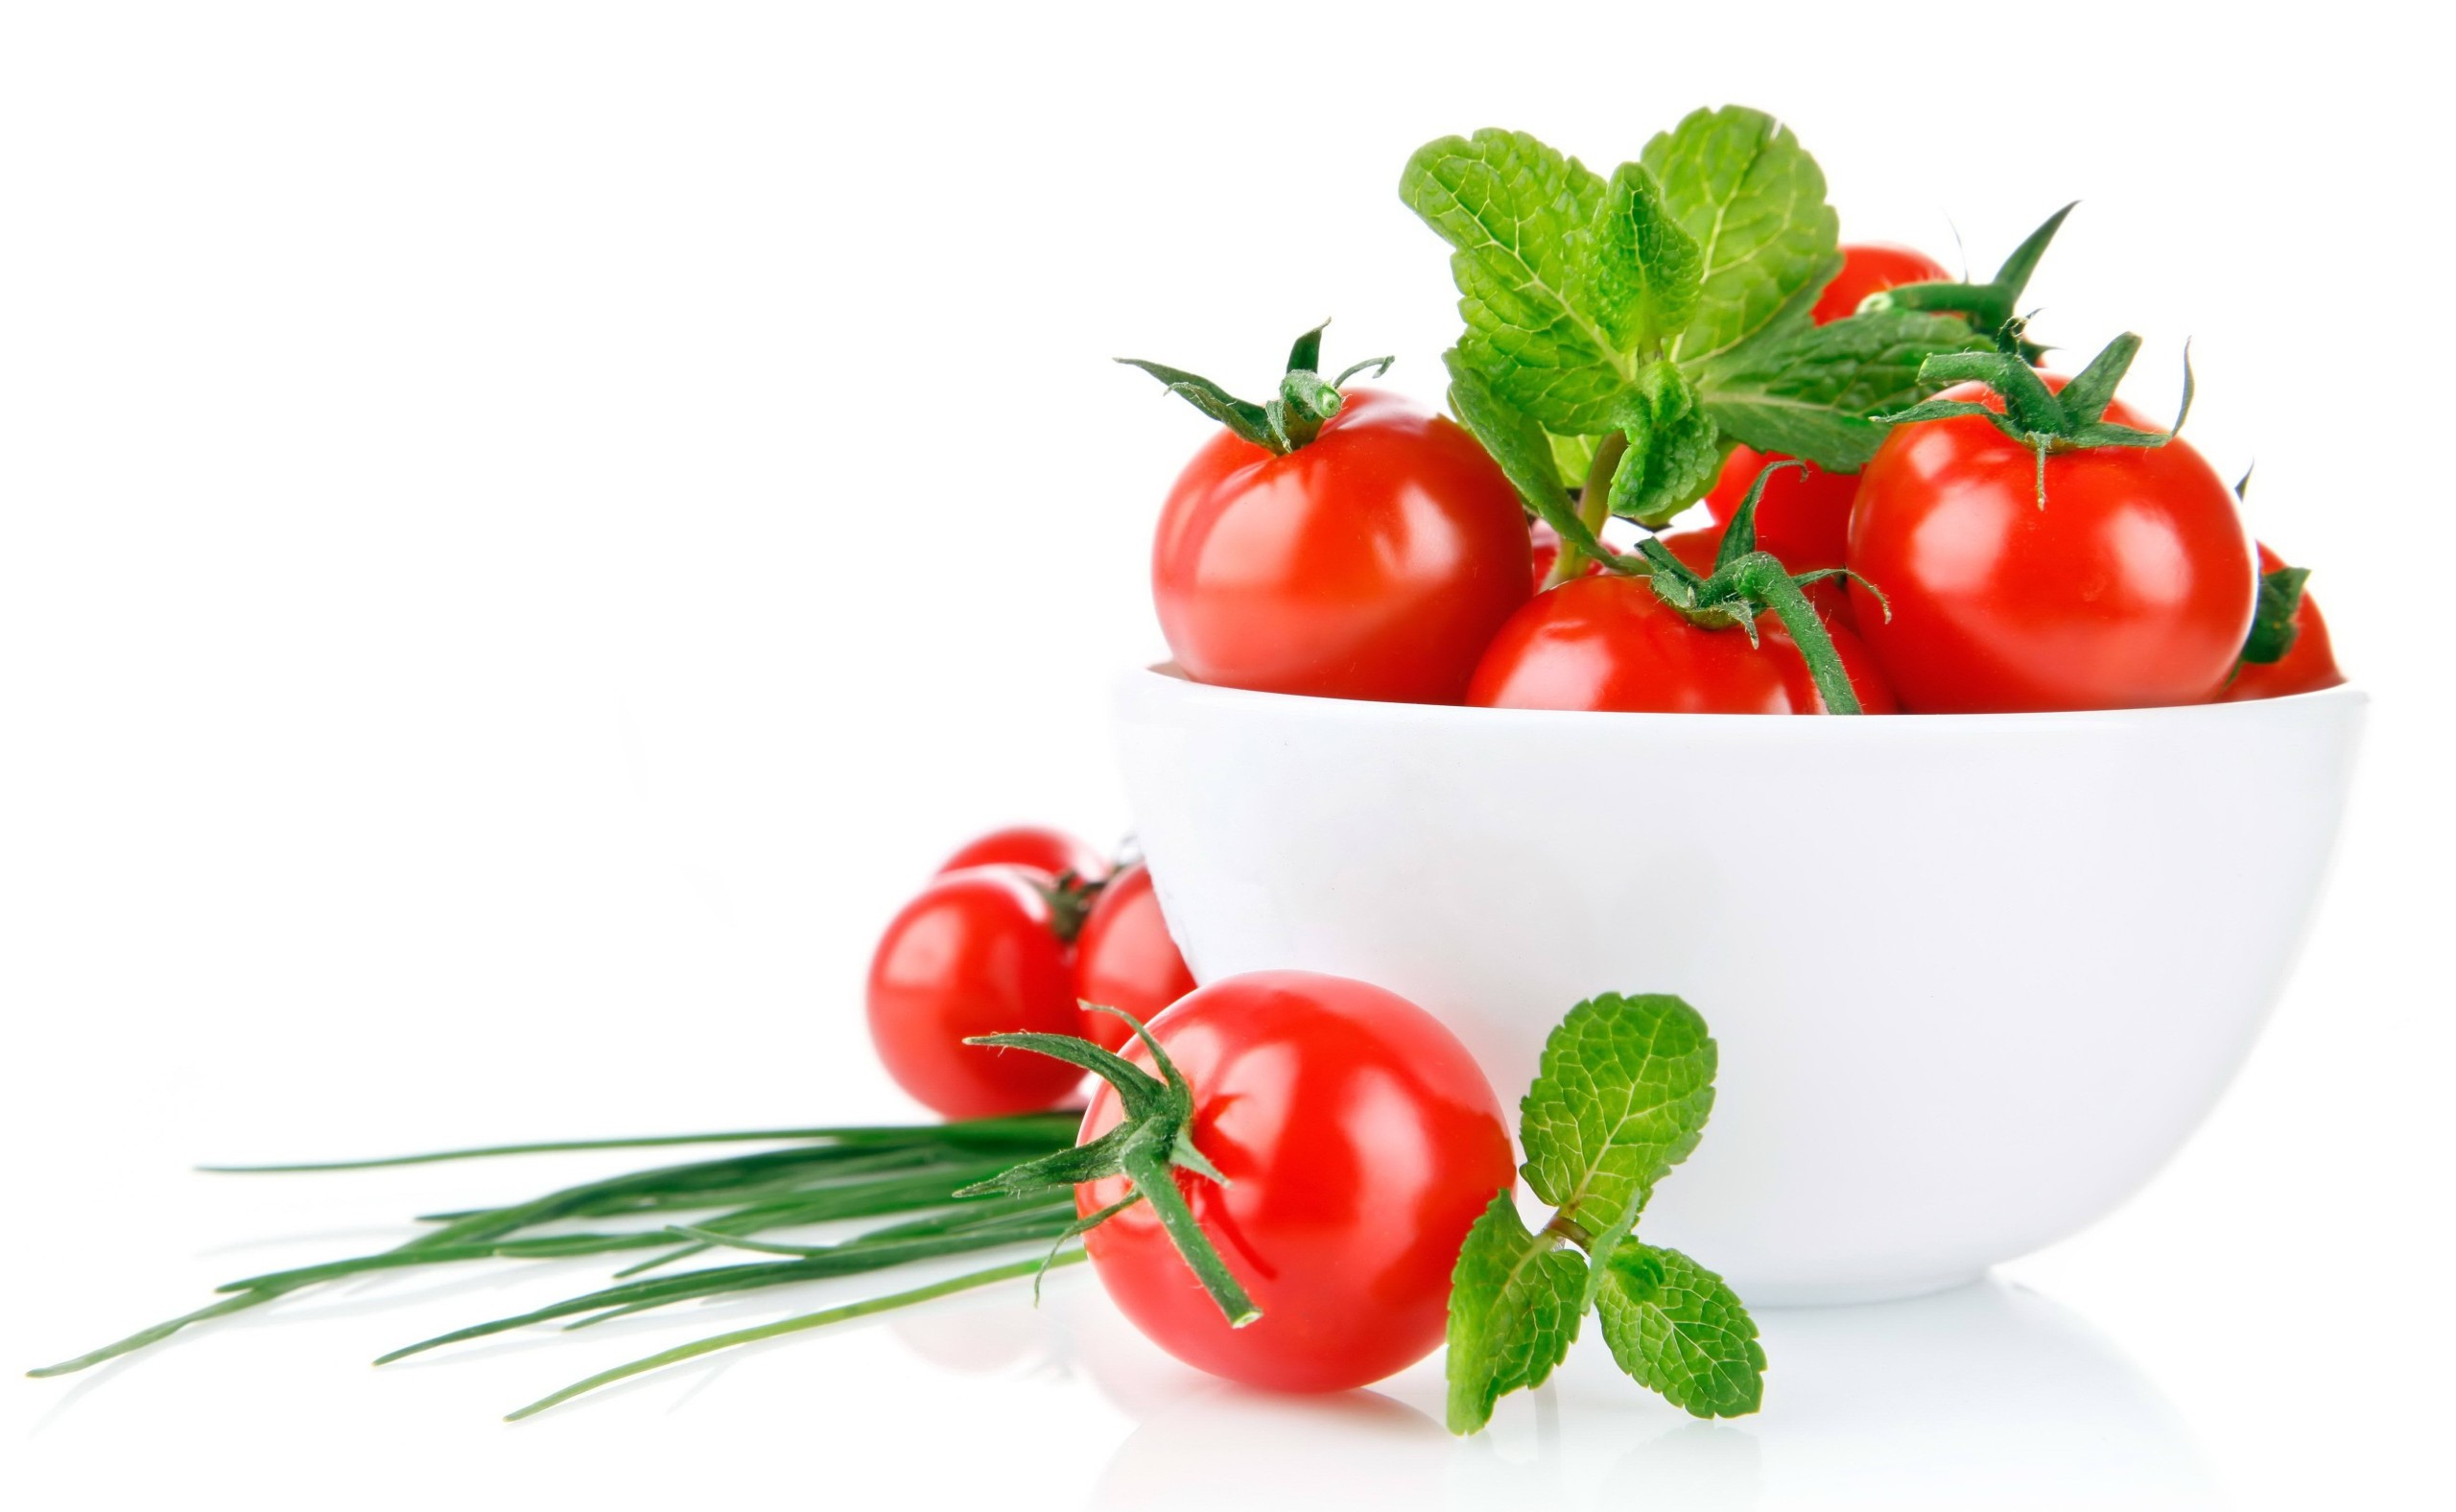 white background, simple background, food, tomatoes, bowls. Mocah HD Wallpaper